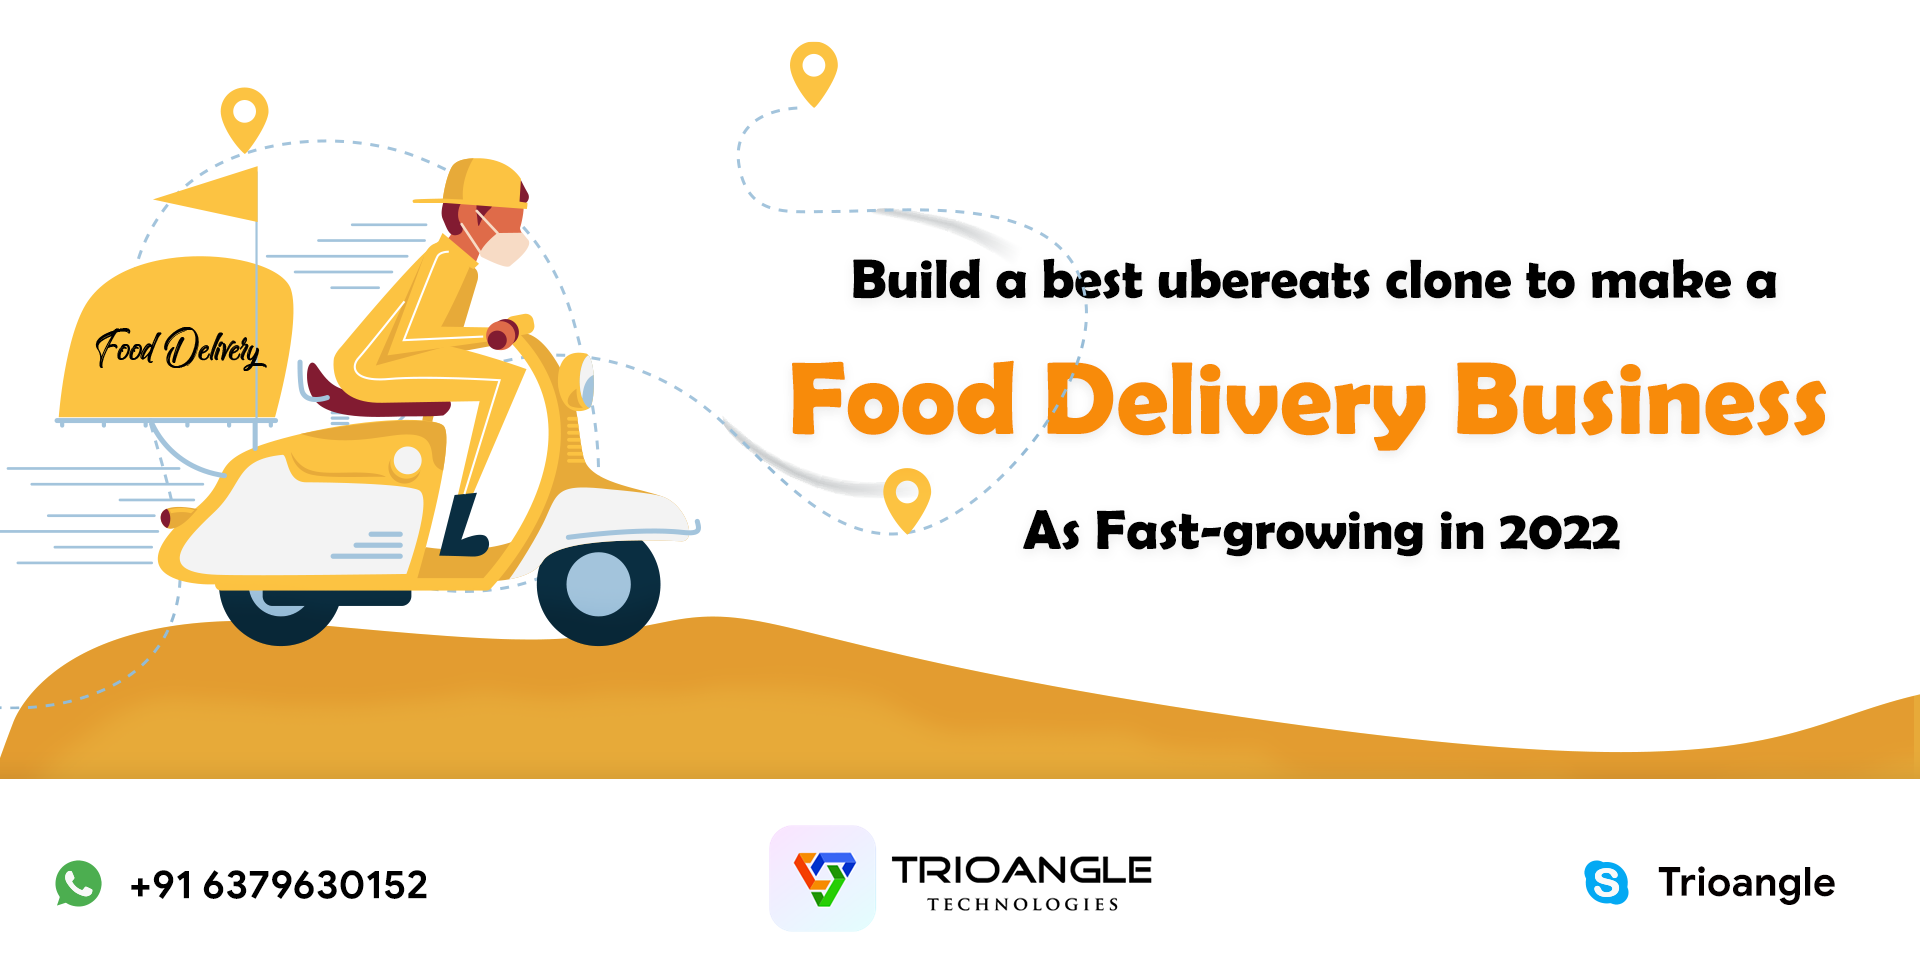 Build a best ubereats clone to make a Food Delivery Business As Fast-growing in 2022